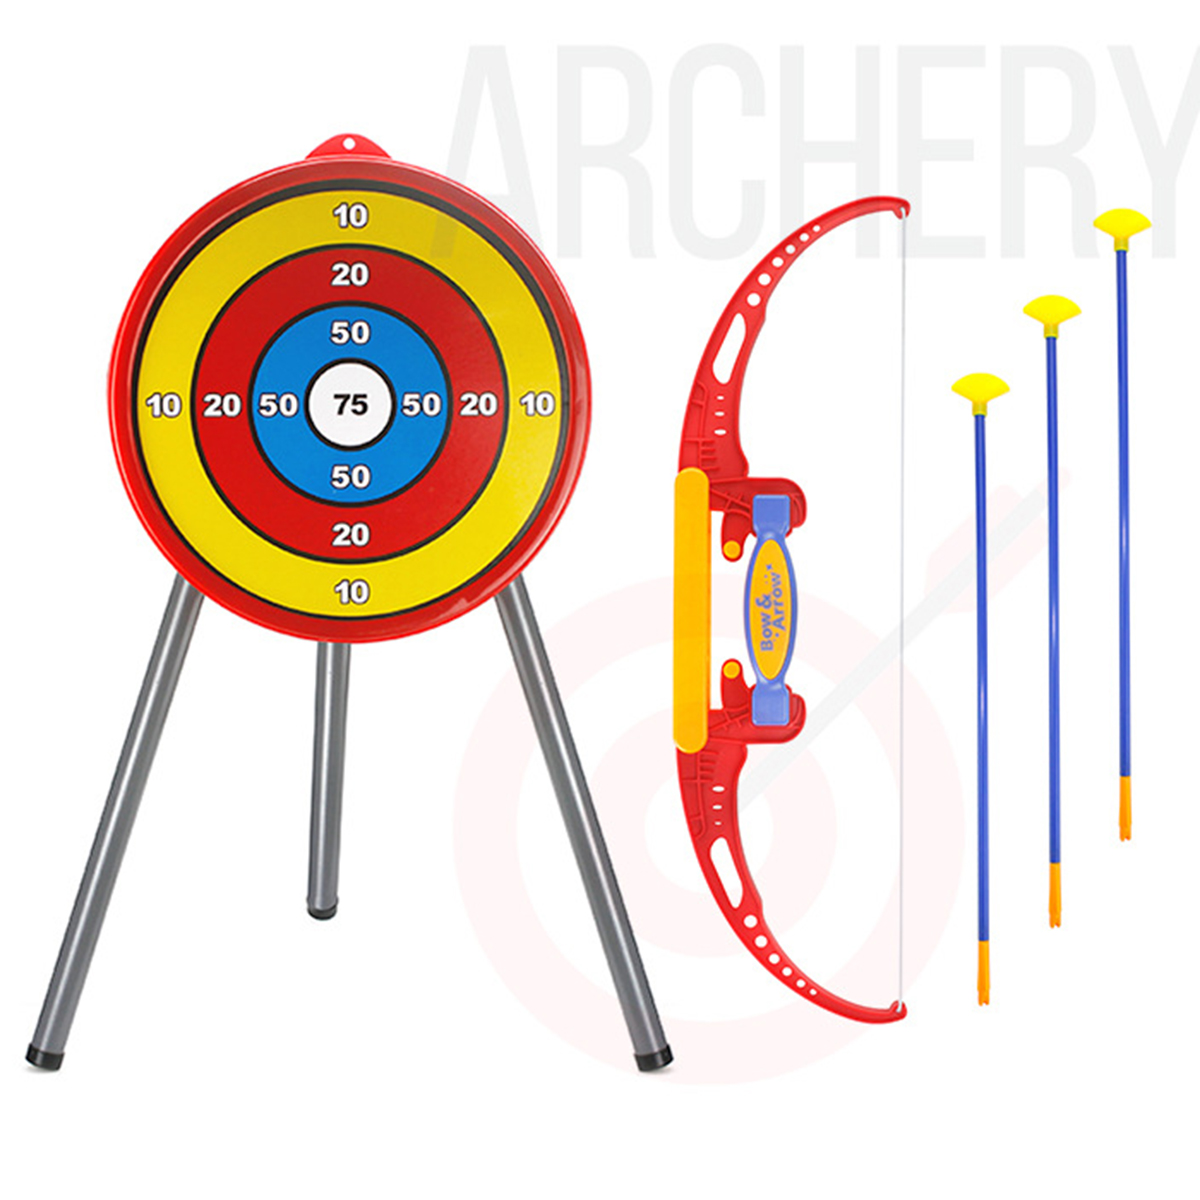 Classic-Archery-Shoot-Game-Set-Develop-Skill-Novelties-Toys-for-Young-Kids-1690766-3